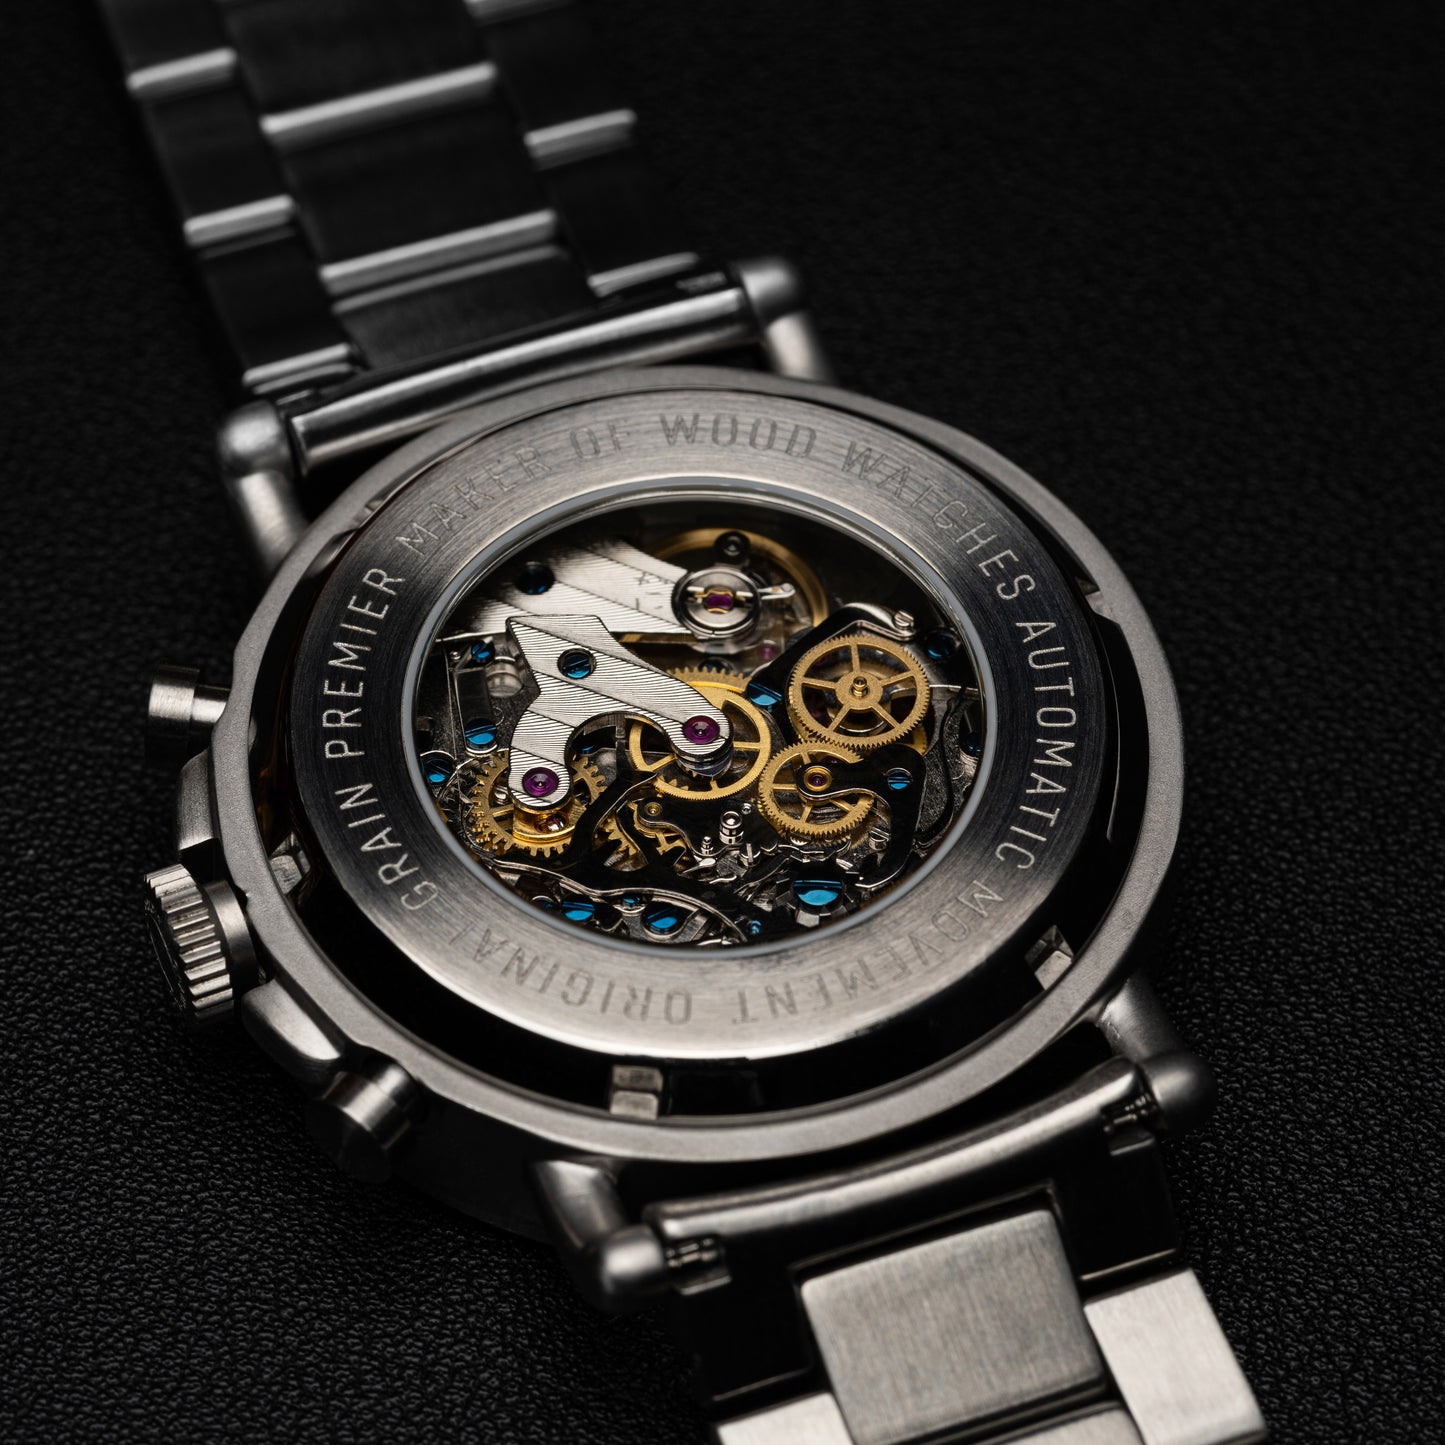 Brewmaster Silver Chrono Mechanical 44mm